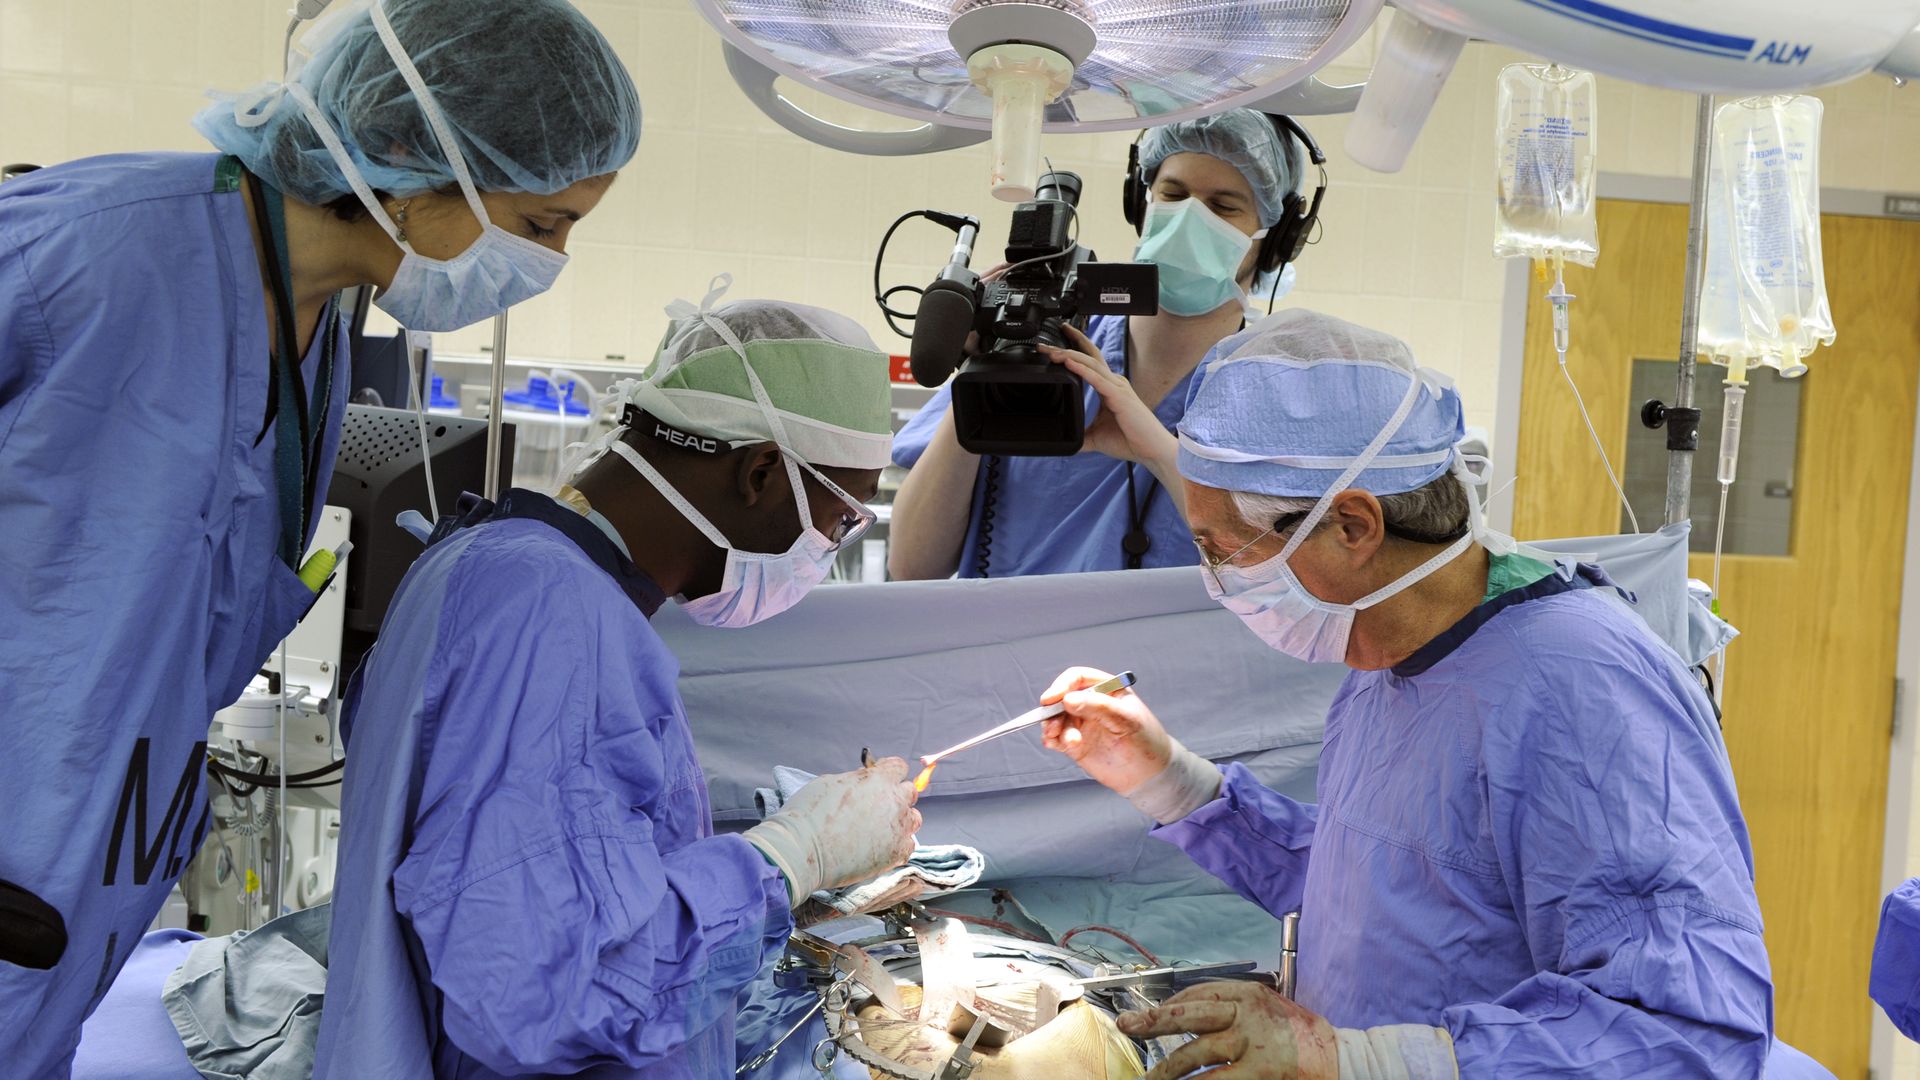 A camerawoman in scrubs films a surgery on ABC's Boston Med